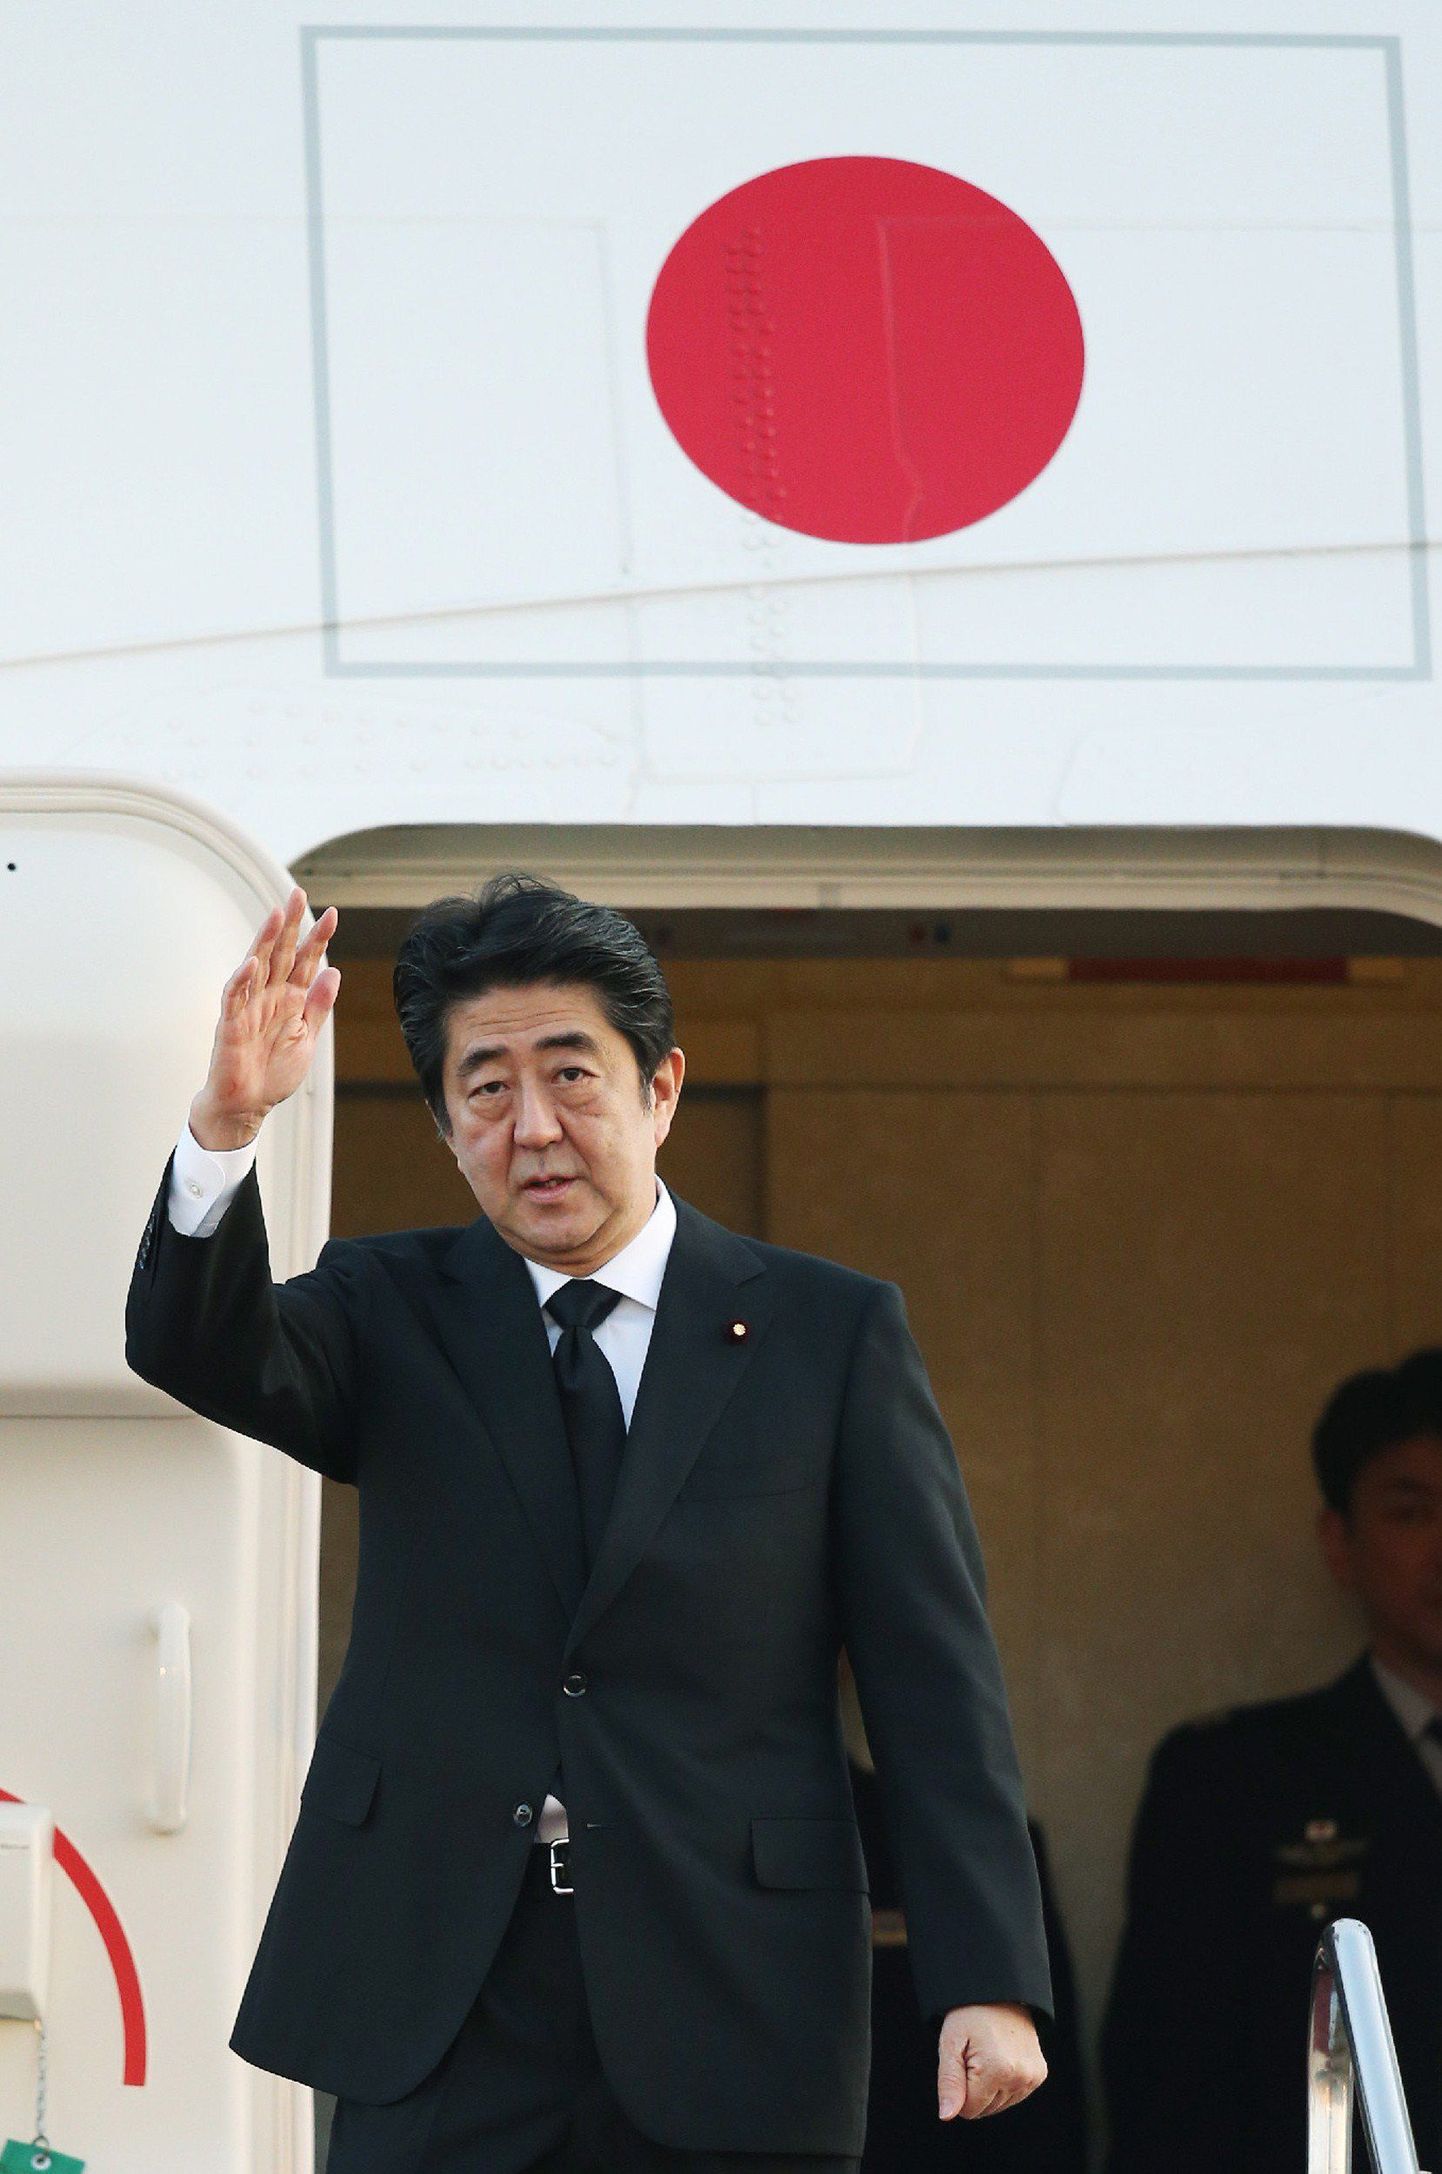 Japanese Prime Minister Shinzo Abe waves as he leaves for Singapore from the Tokyo International Airport on March 29, 2015.  Abe will attend the state funeral of Singapore's founding leader Lee Kuan Yew.   AFP PHOTO / JIJI PRESS    JAPAN OUT